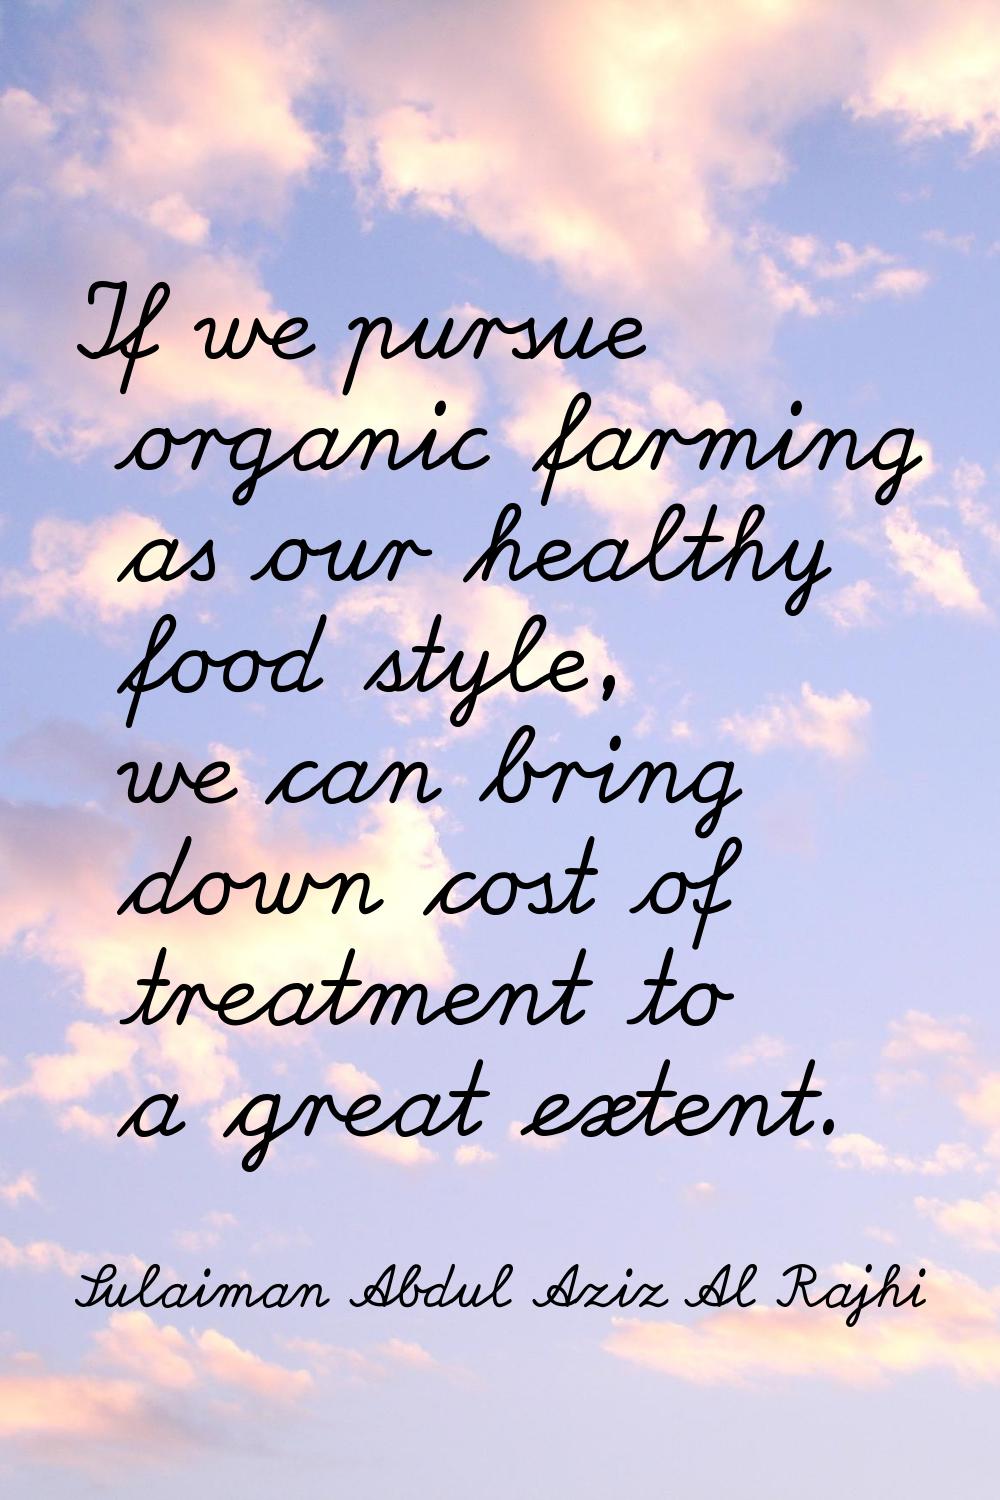 If we pursue organic farming as our healthy food style, we can bring down cost of treatment to a gr